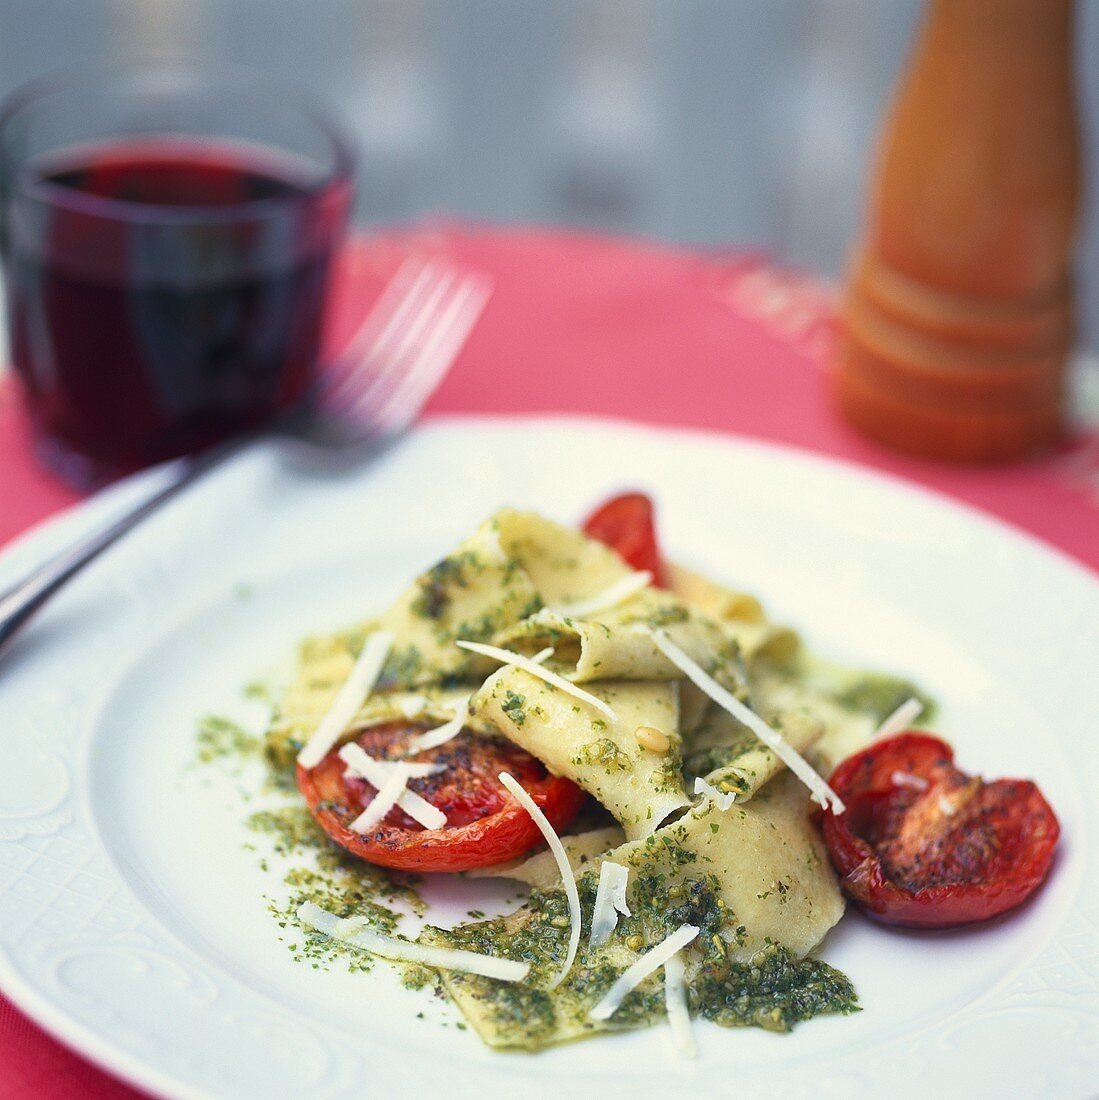 Pappardelle with pesto and tomatoes